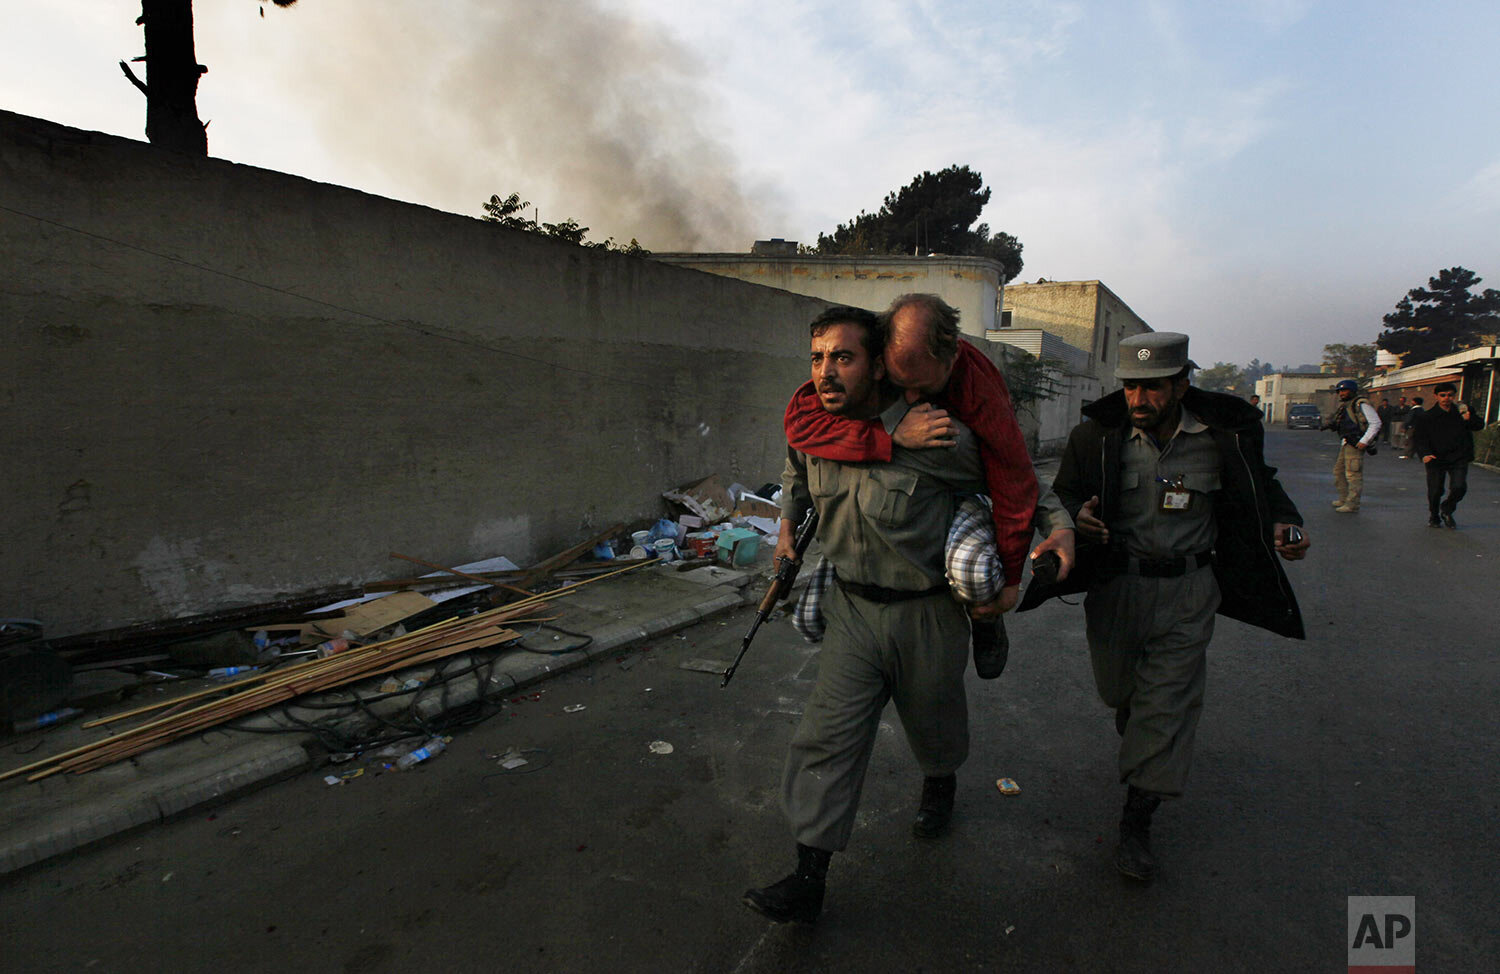  An Afghan police officer carries an injured unidentified German national as smoke bellows from the site of an attack in Kabul, Afghanistan on Wednesday, Oct. 28, 2009. Gunmen attacked a guest house used by U.N. staff in the Afghan capital of Kabul. 